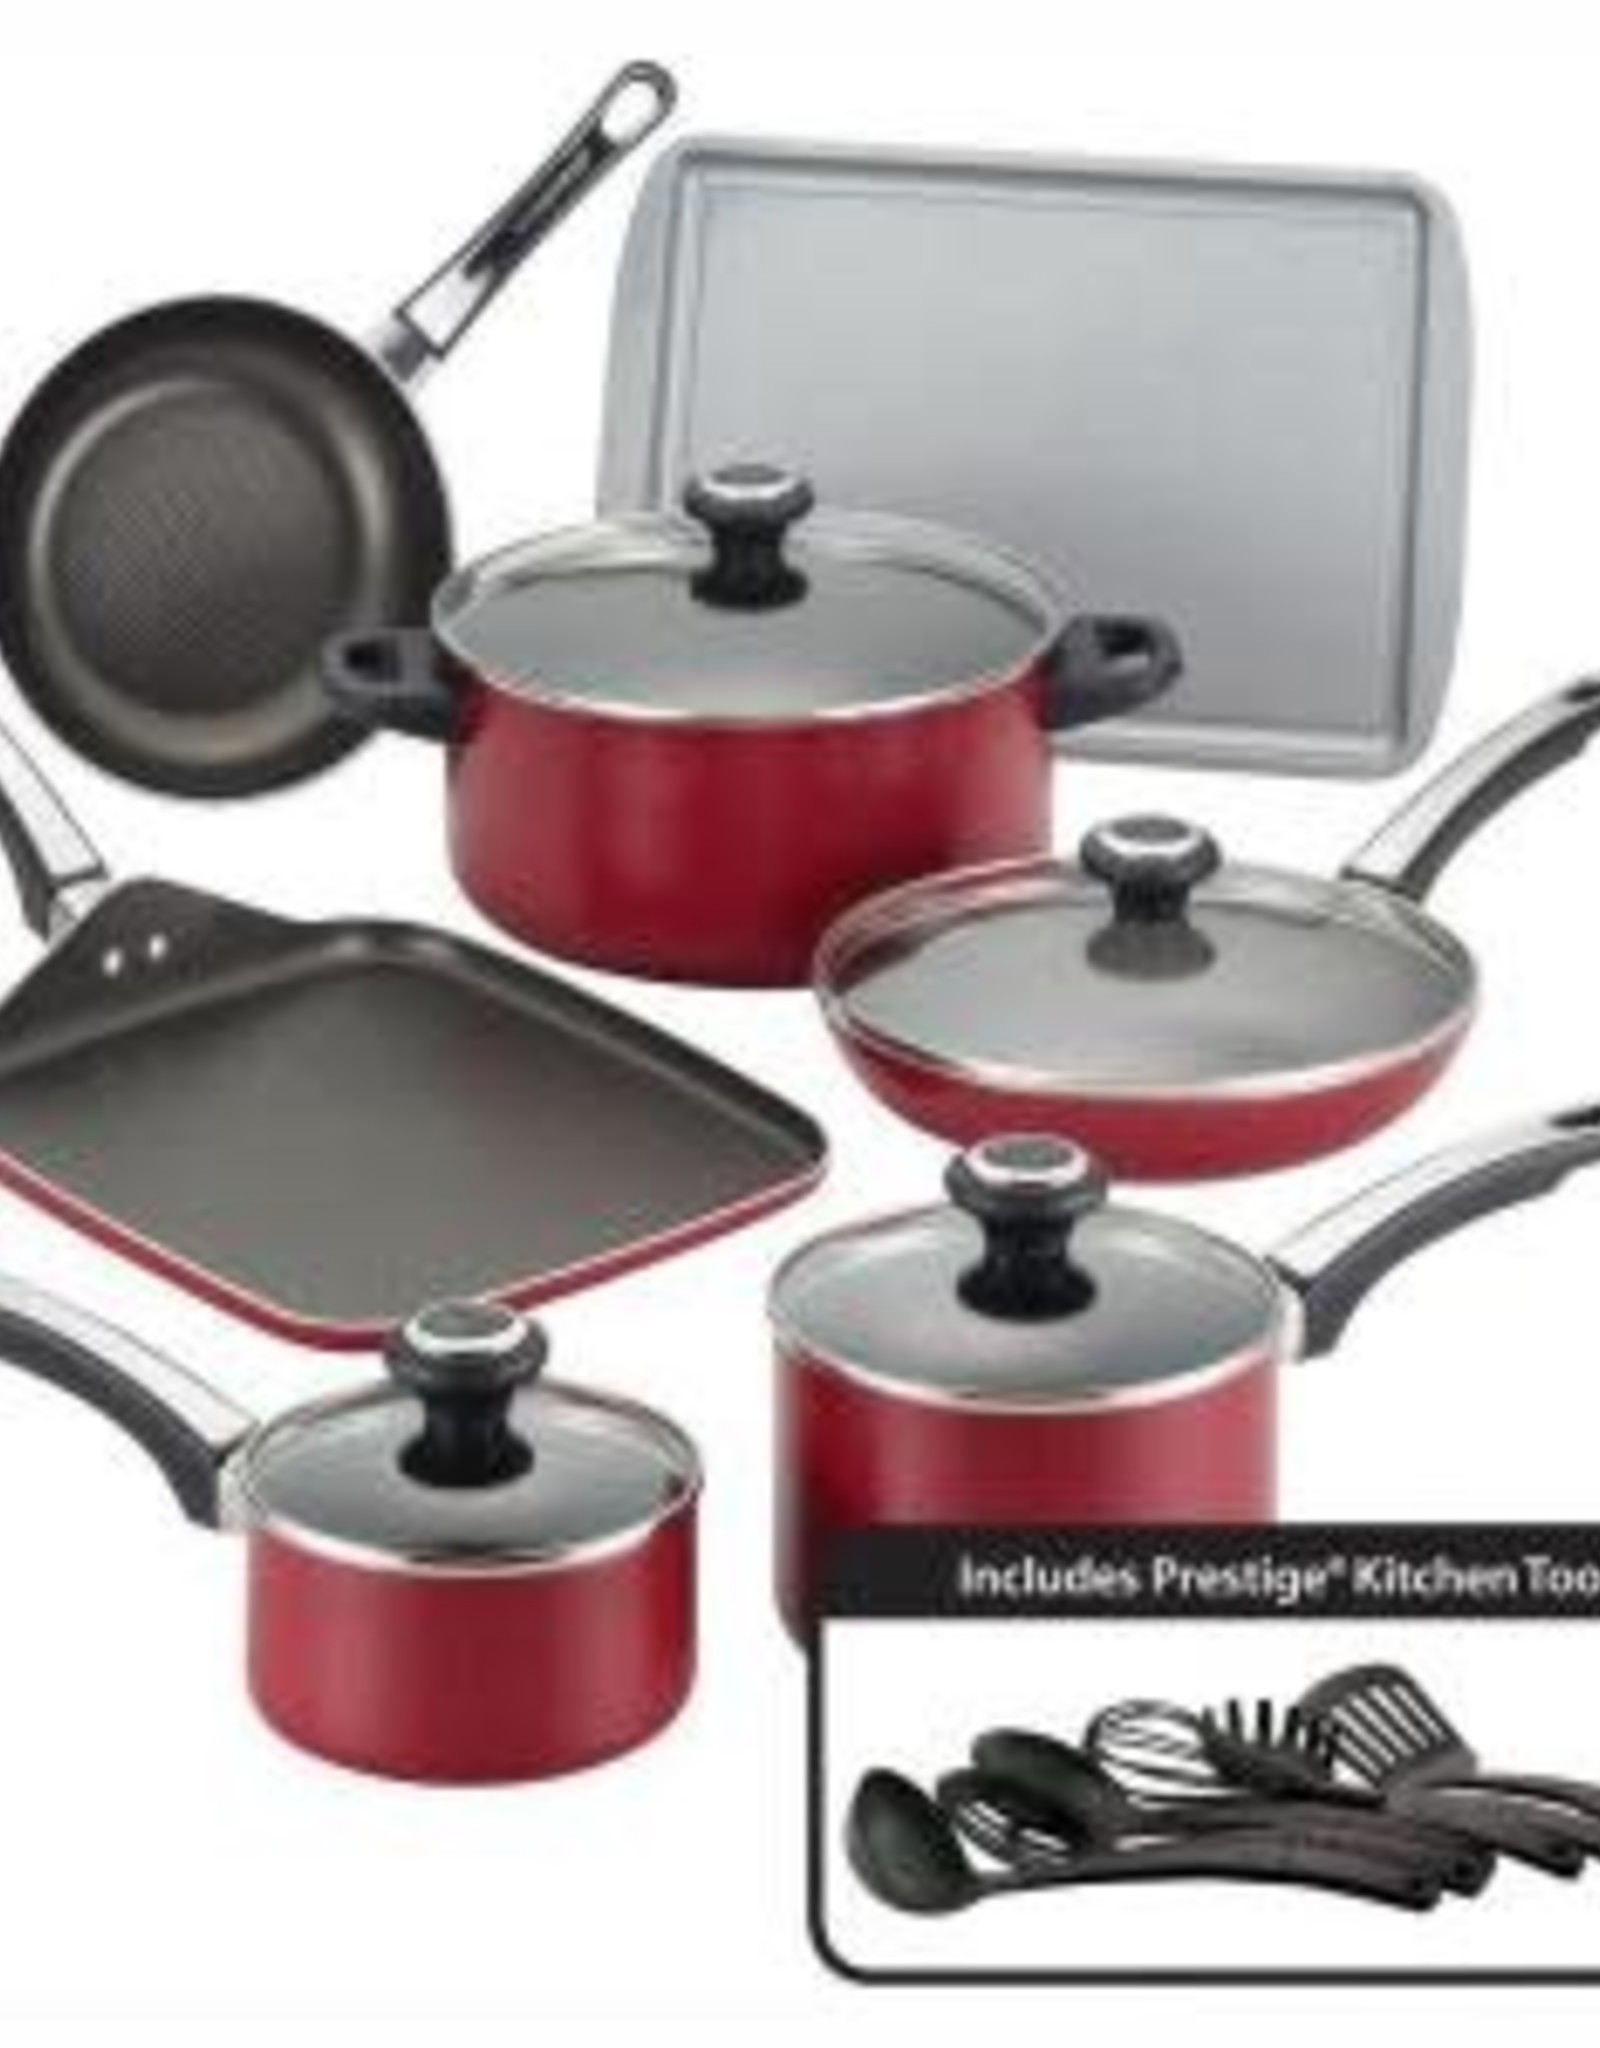 Farberware High Performance 17-Piece Red Cookware Set with Lids